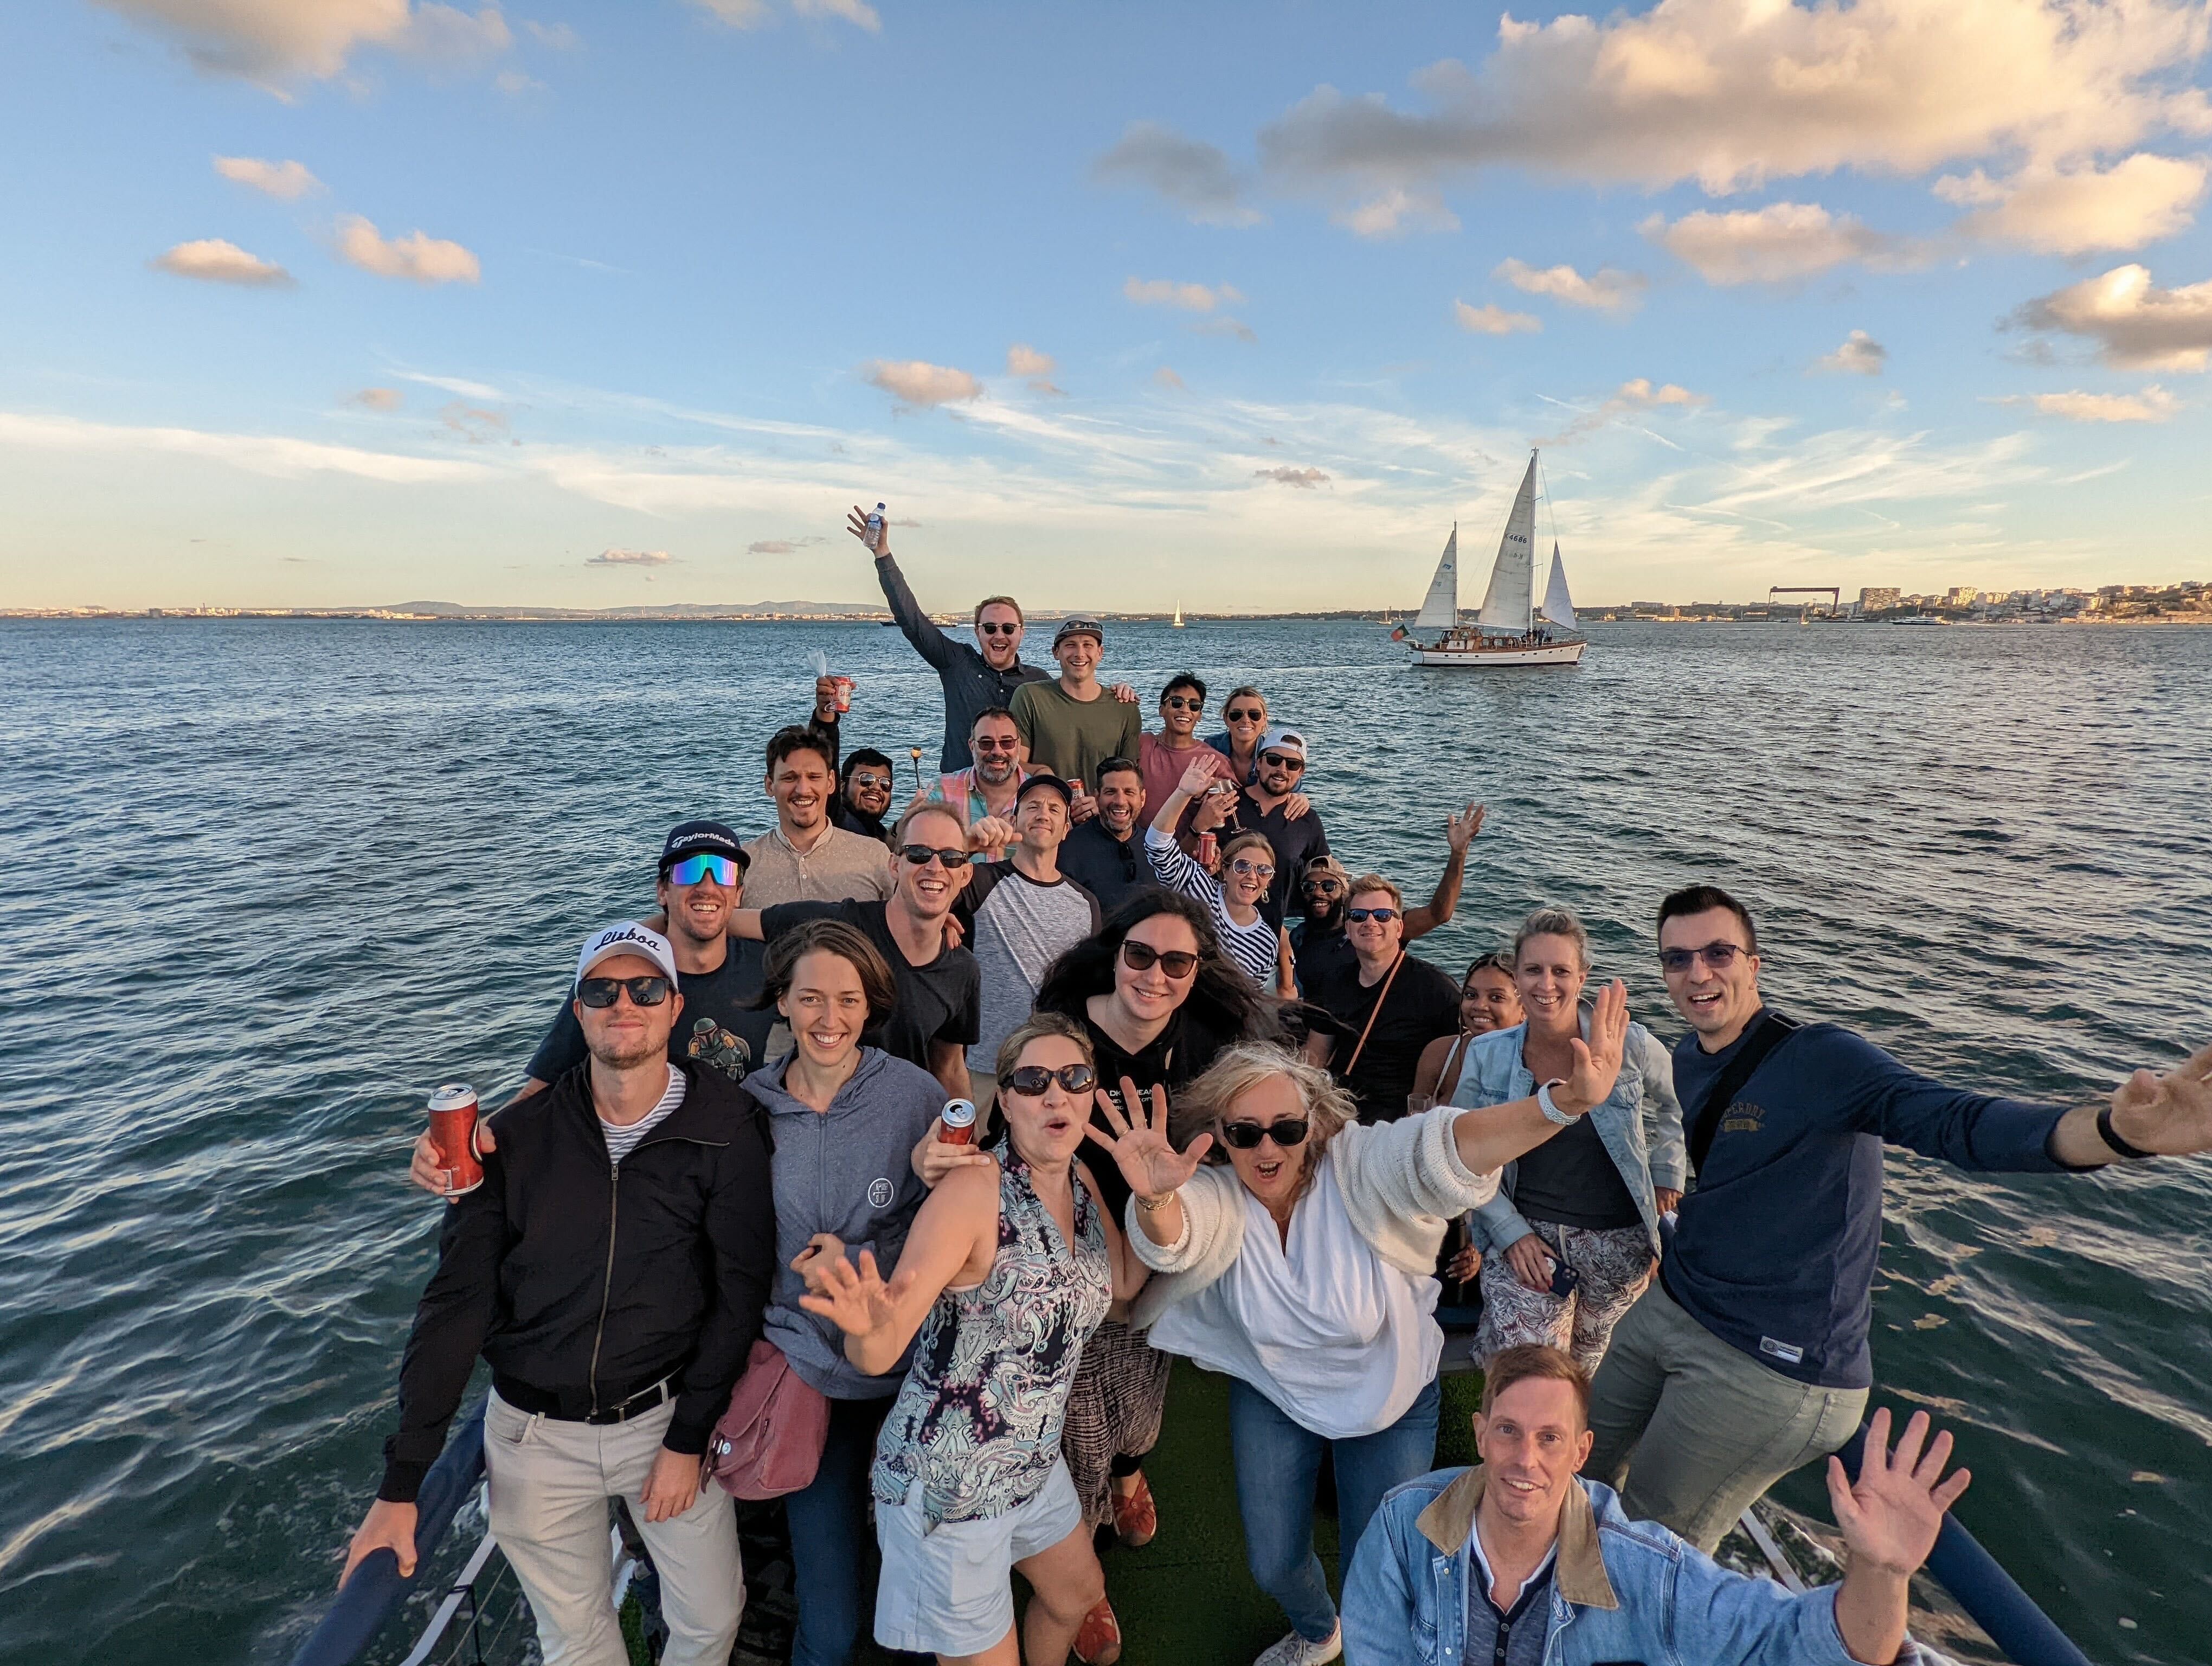 Colleagues on a private boat cruise